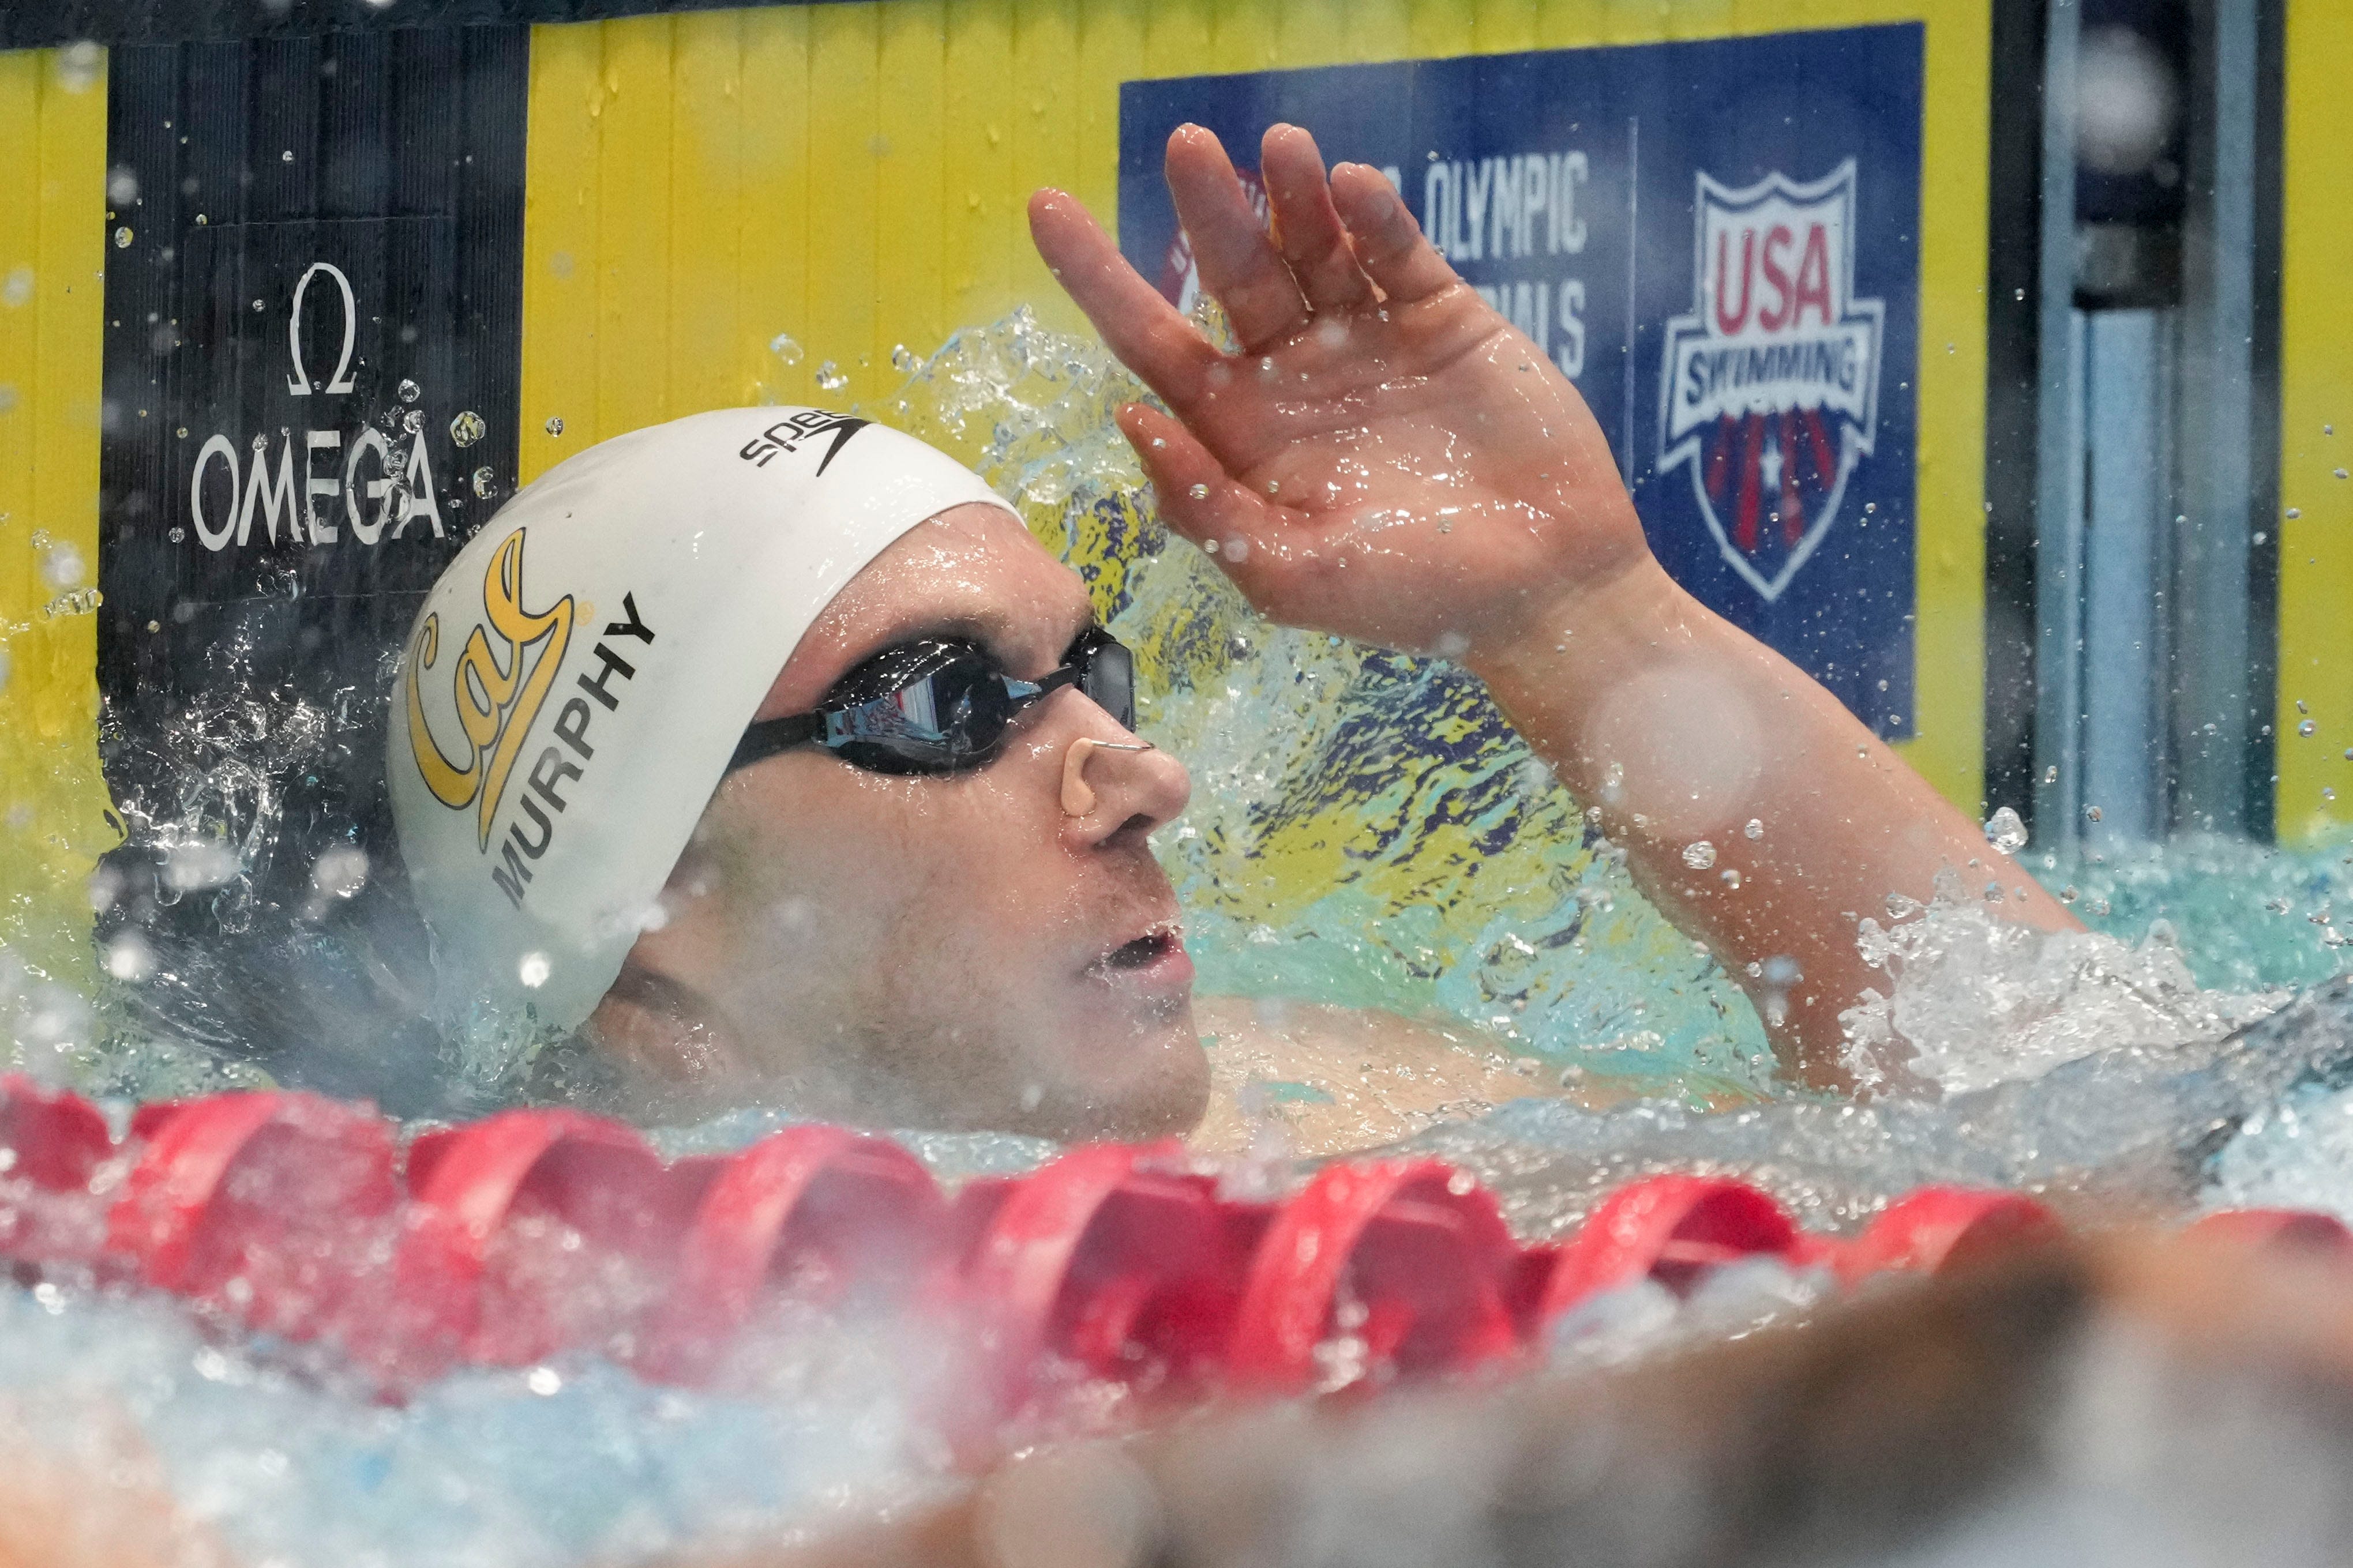 Ticket punched for Paris! Ryan Murphy makes history again at U.S. Olympic Trials swimming